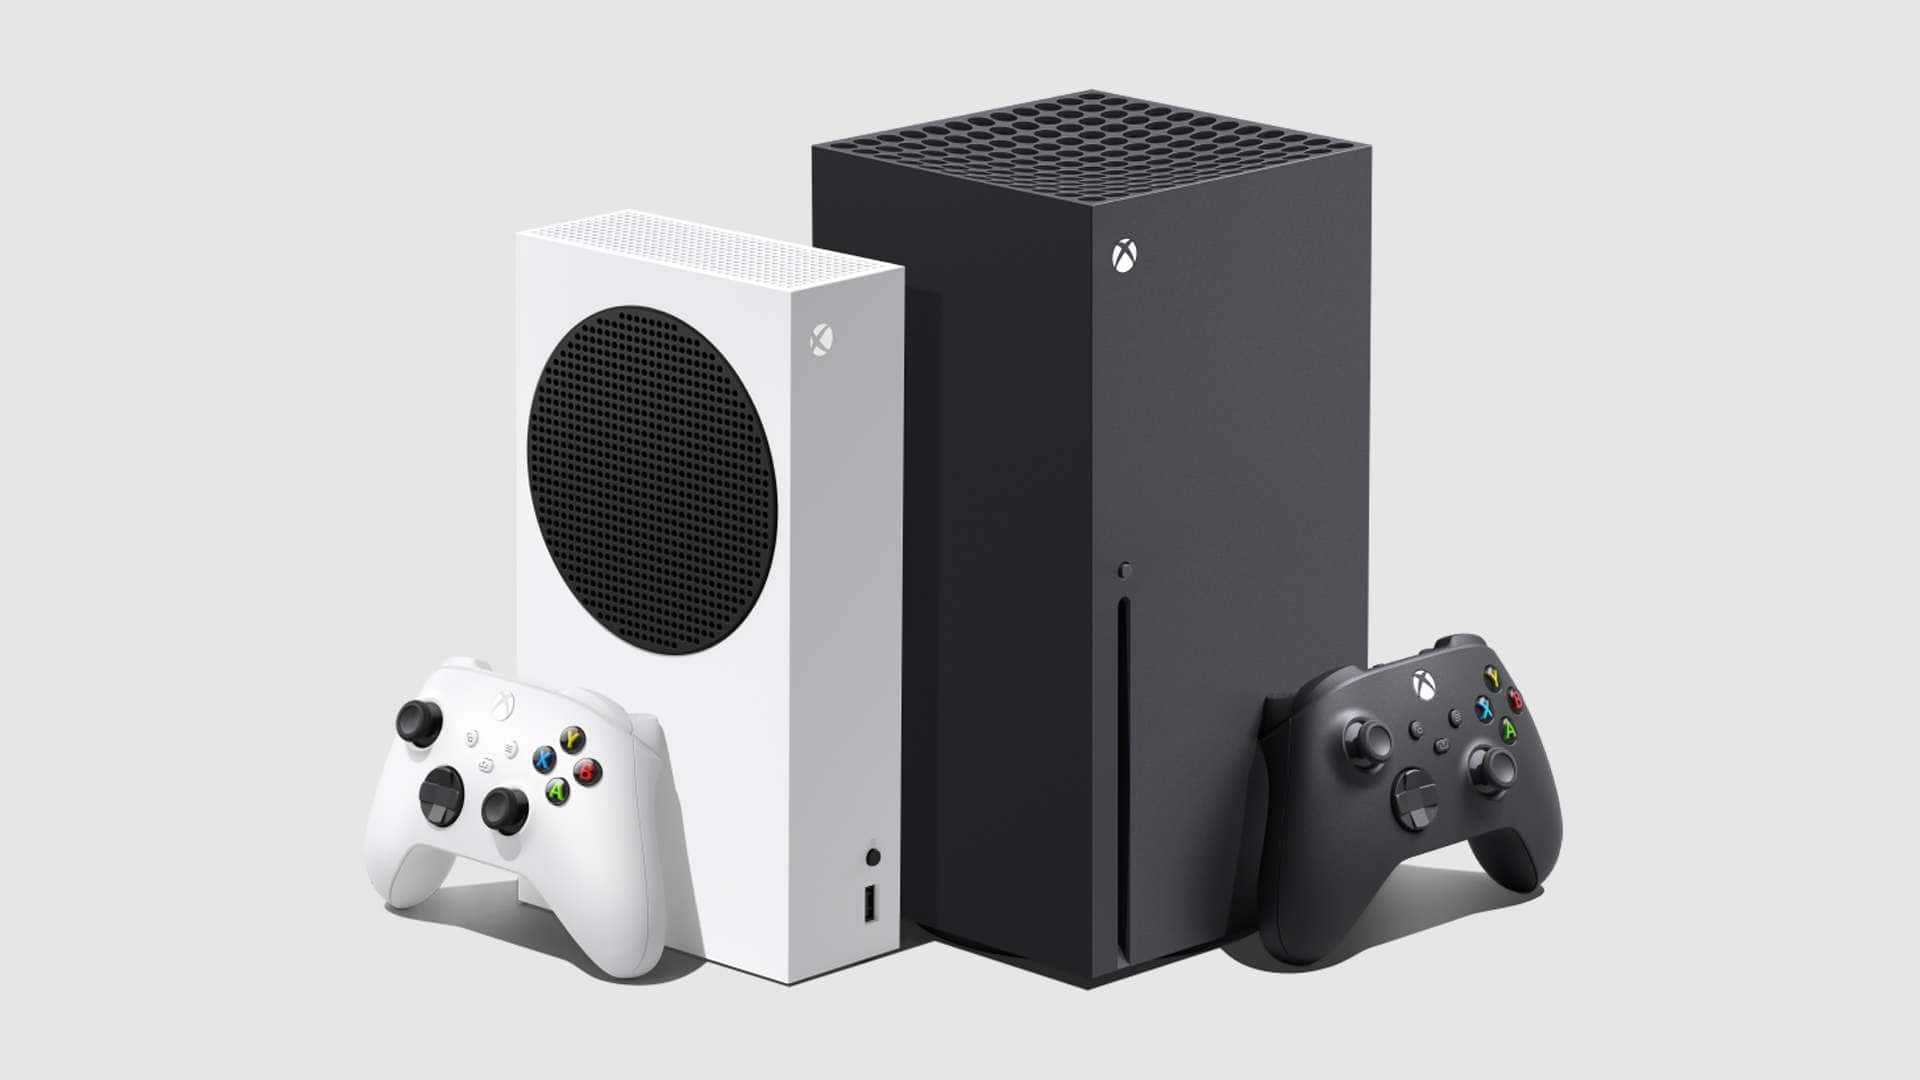 How To Find the Xbox Series X and S Console In Stock